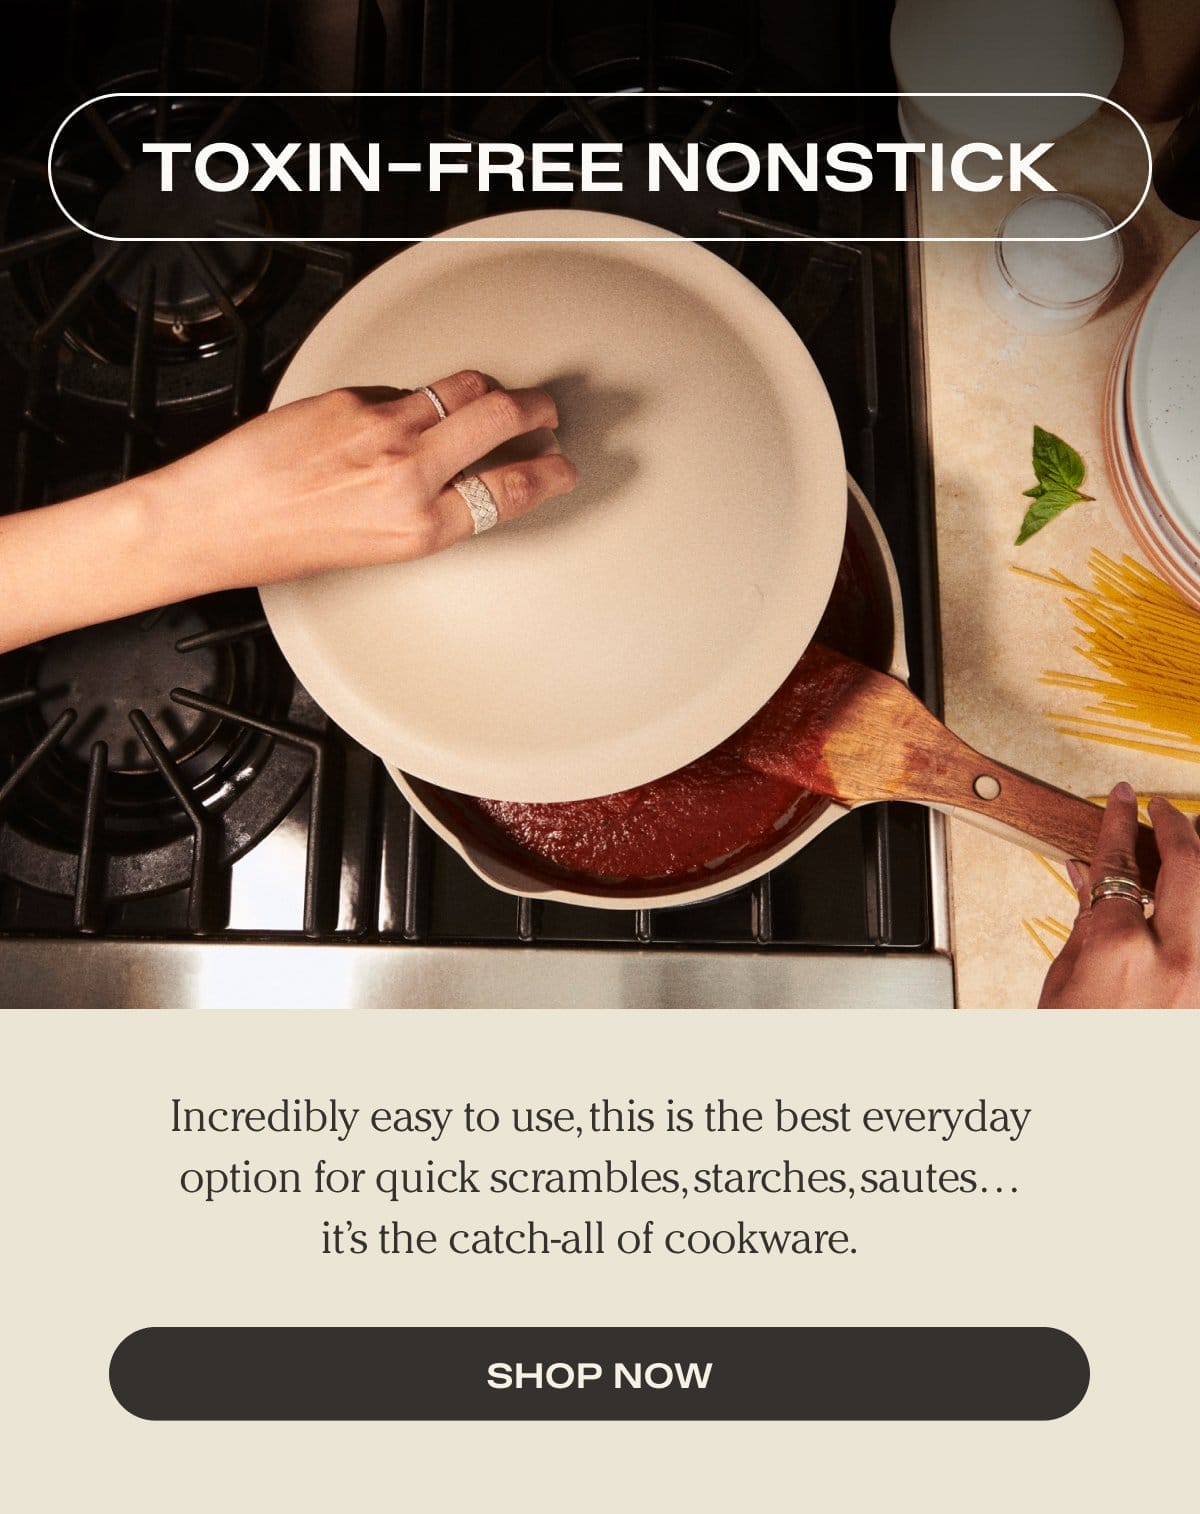 Toxin-Free Nonstick - Shop Now